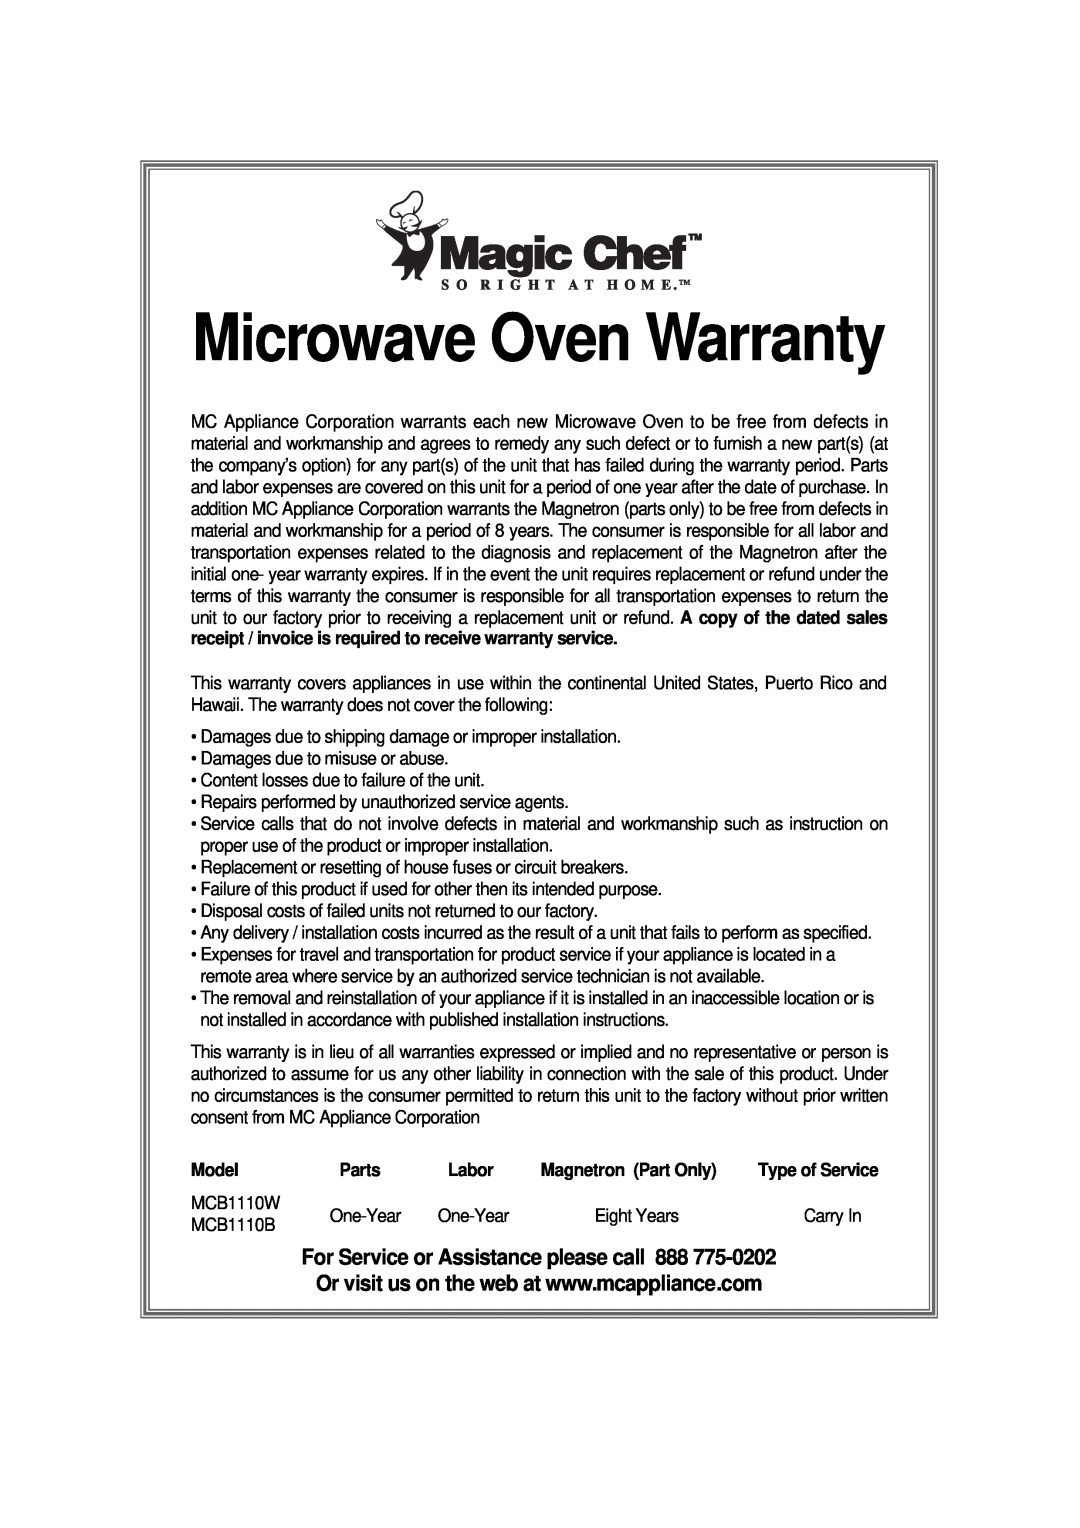 Magic Chef MCB1110B instruction manual Model, Parts, Labor, Magnetron Part Only, Microwave Oven Warranty 